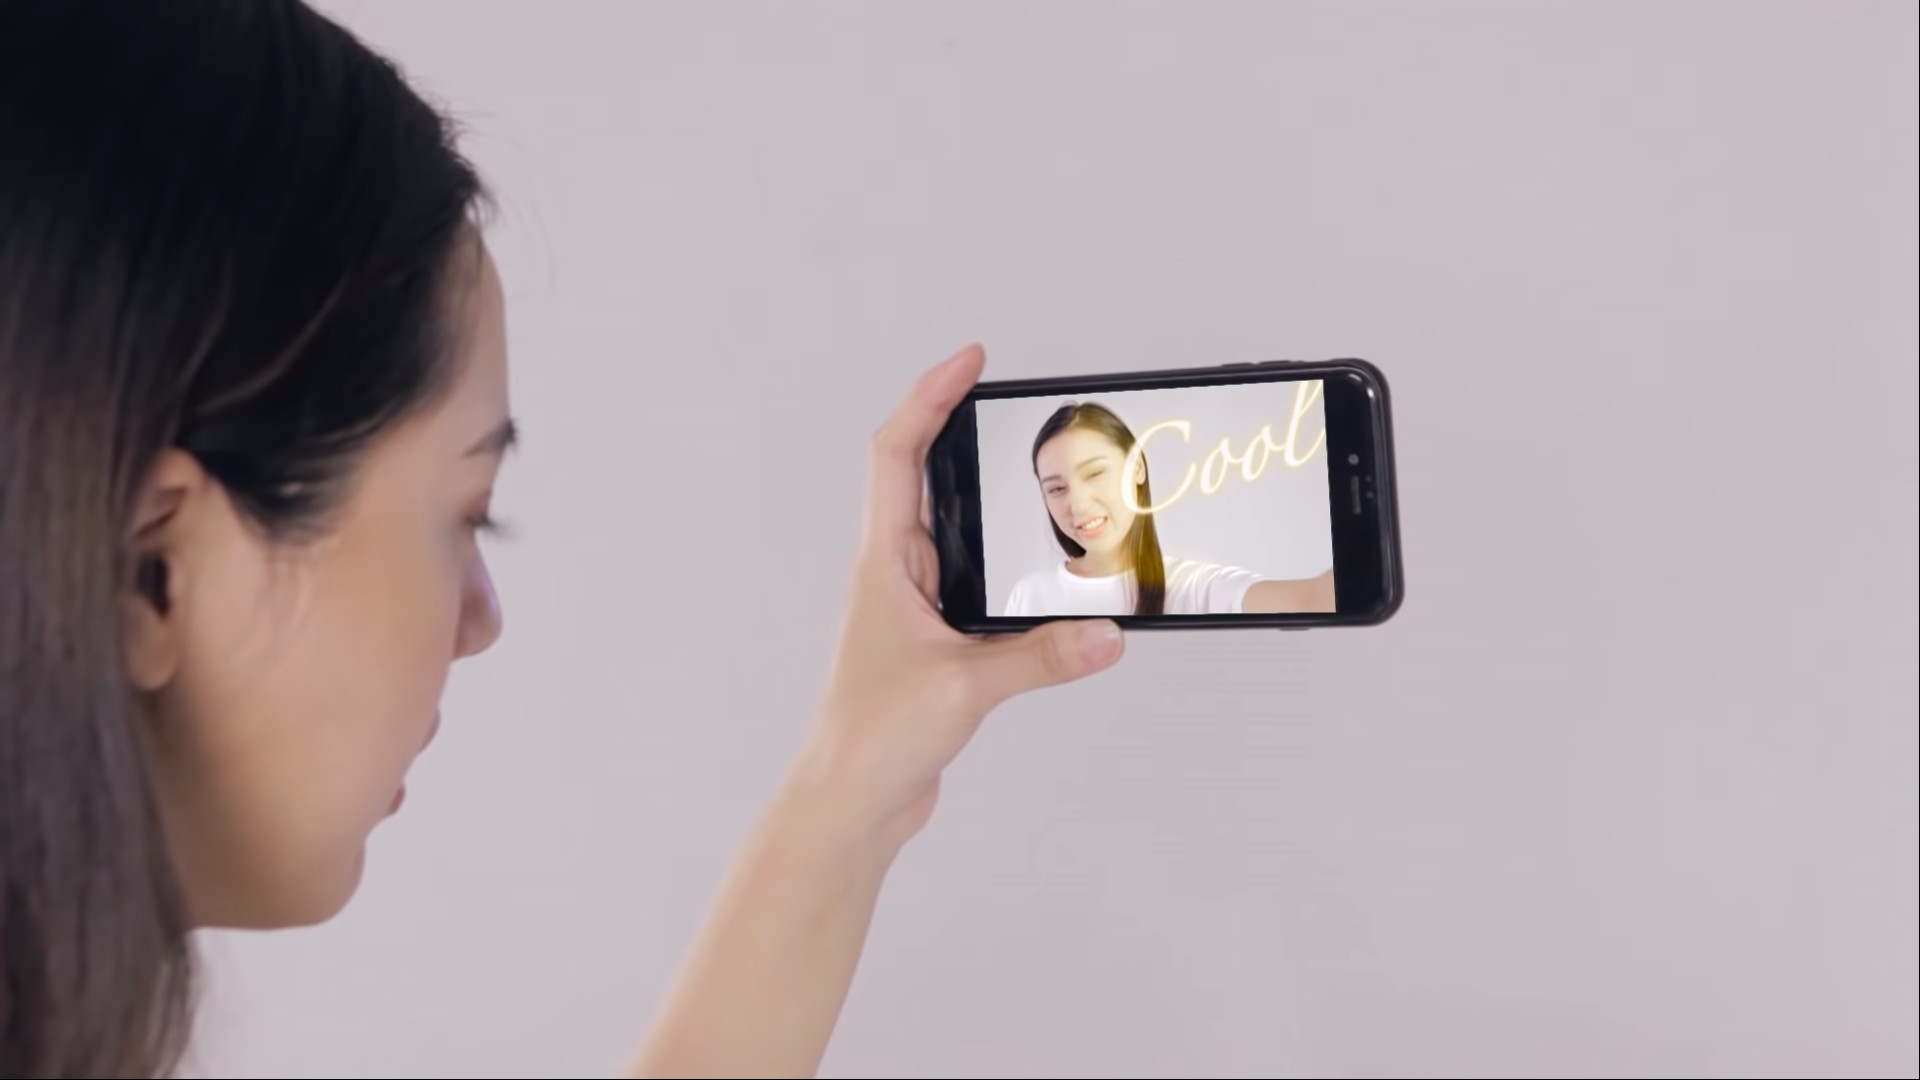 A Sony concept, showing augmented reality selfies.